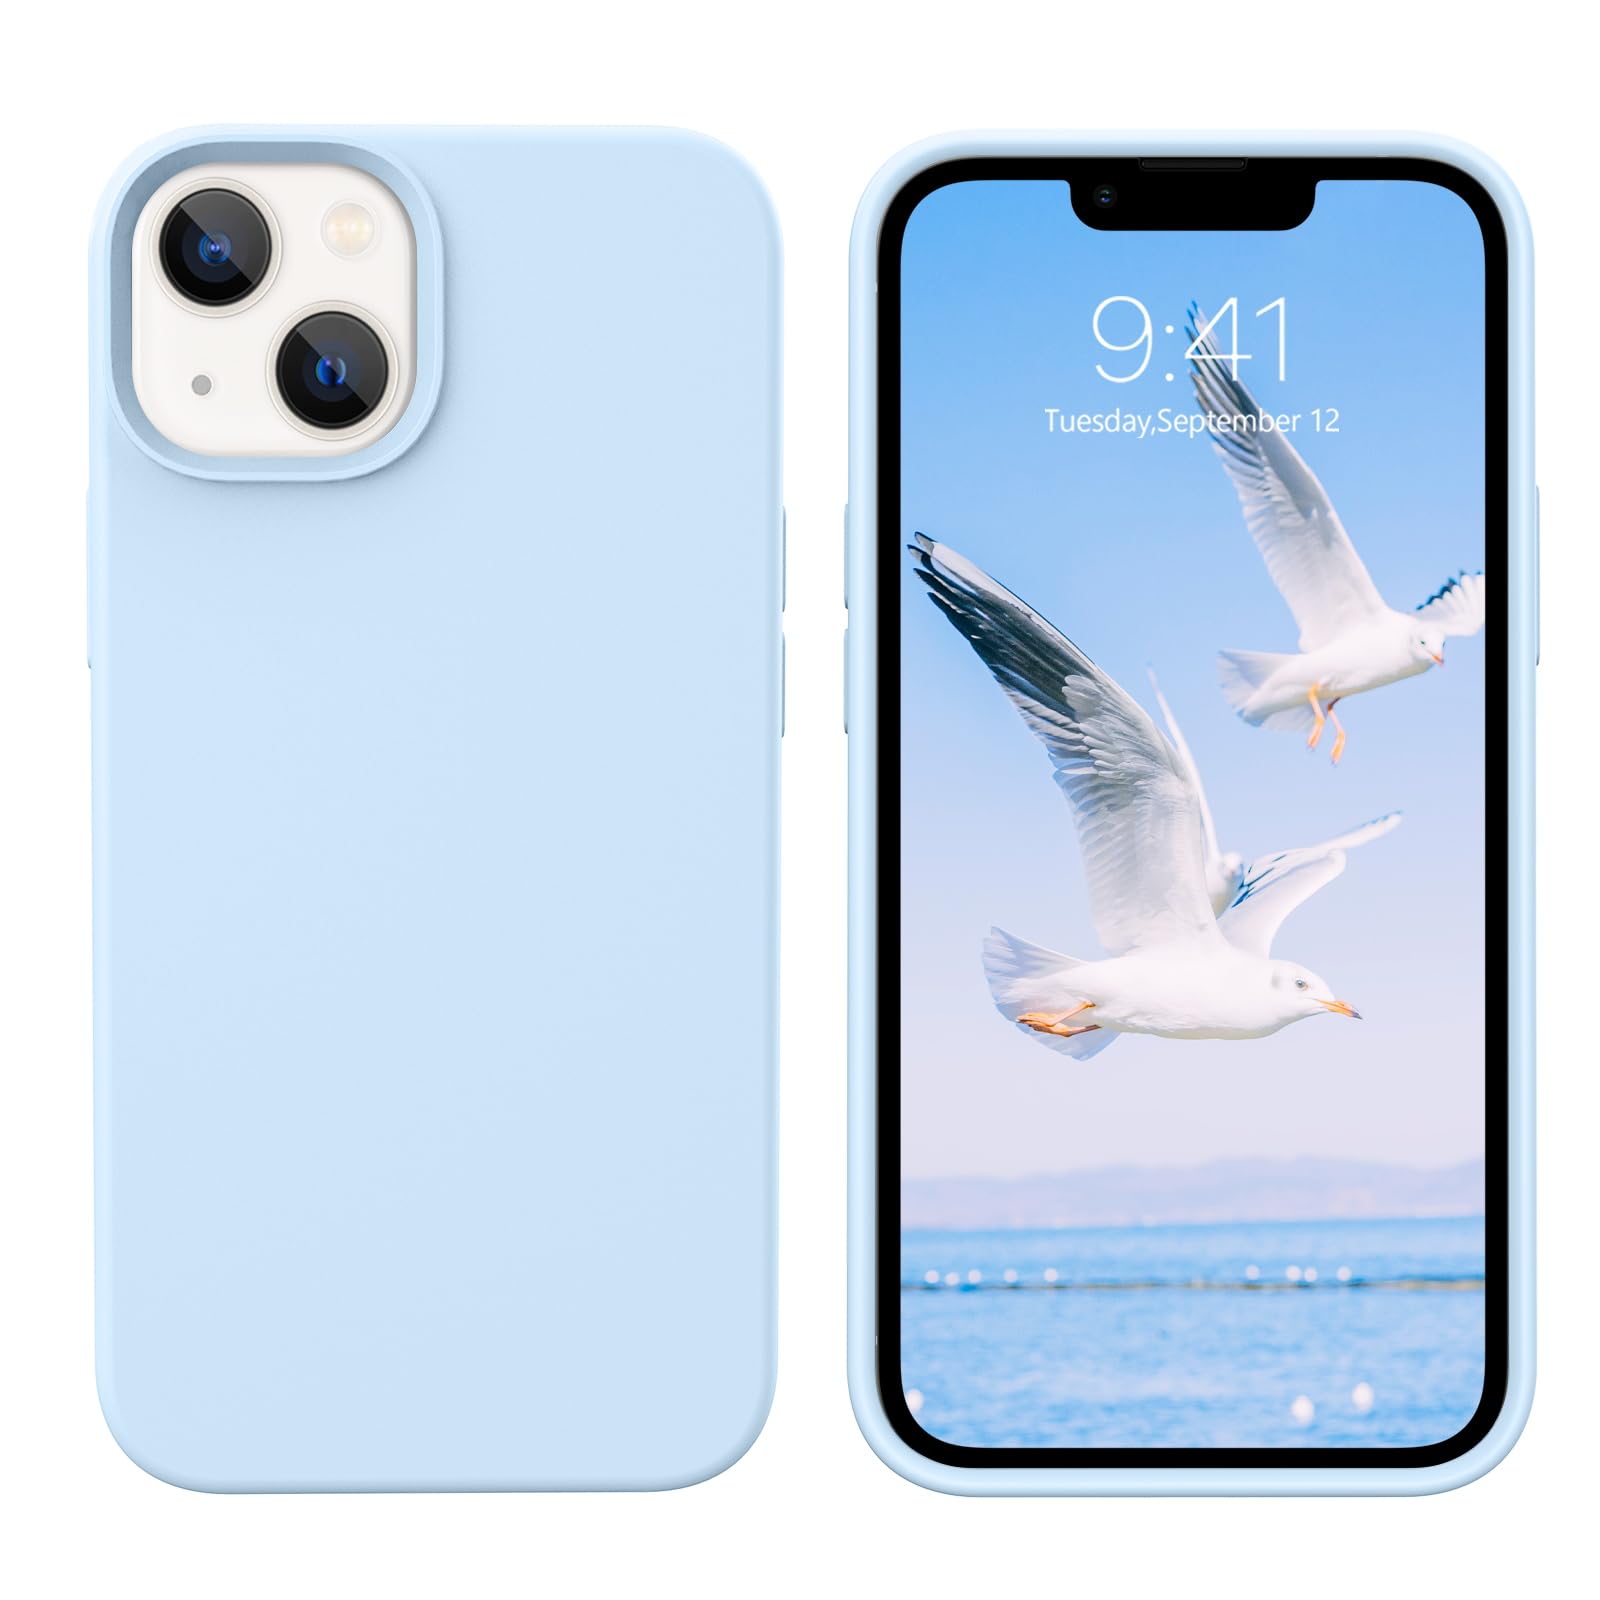 GUAGUA for iPhone 13 Mini Case, iPhone 13 Mini Silicone Case, Soft Gel Rubber Slim Lightweight Microfiber Lining Cushion Texture Shockproof Protective Phone Case for iPhone 13 Mini 5.4'', Light Blue